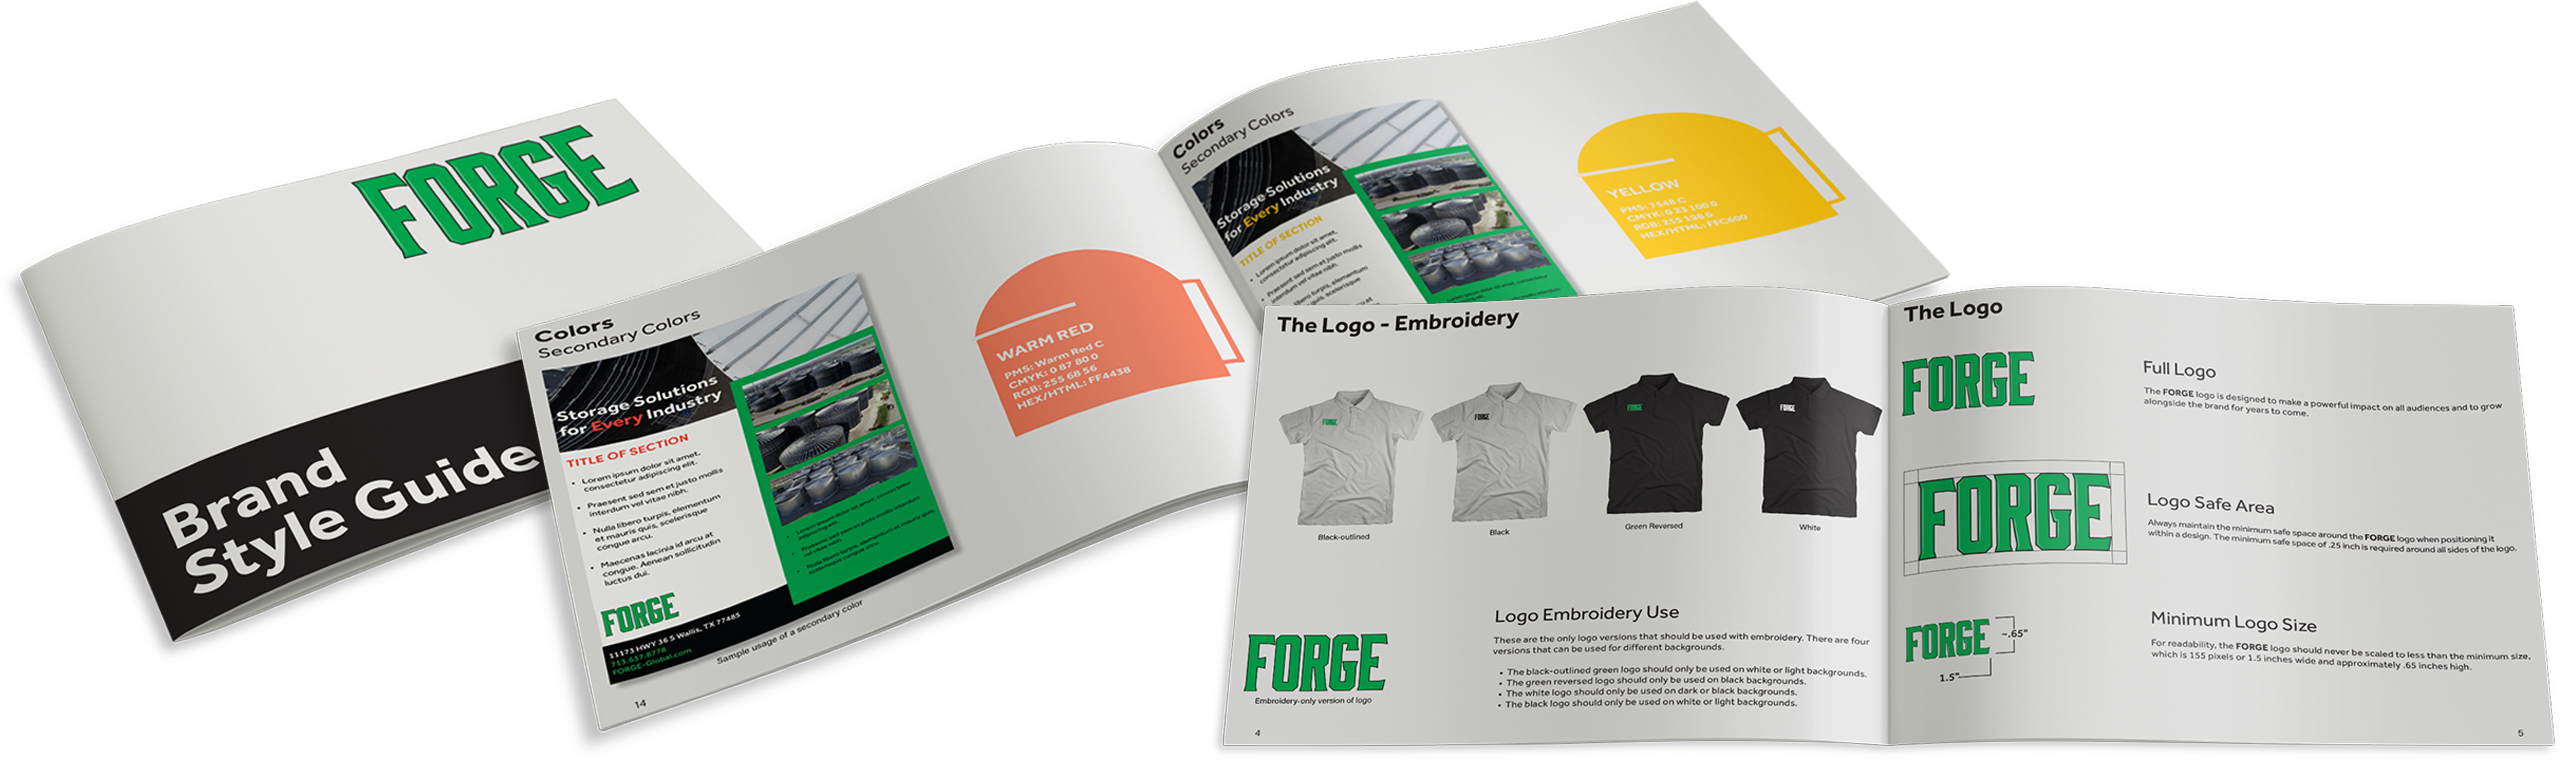 FORGE style guide